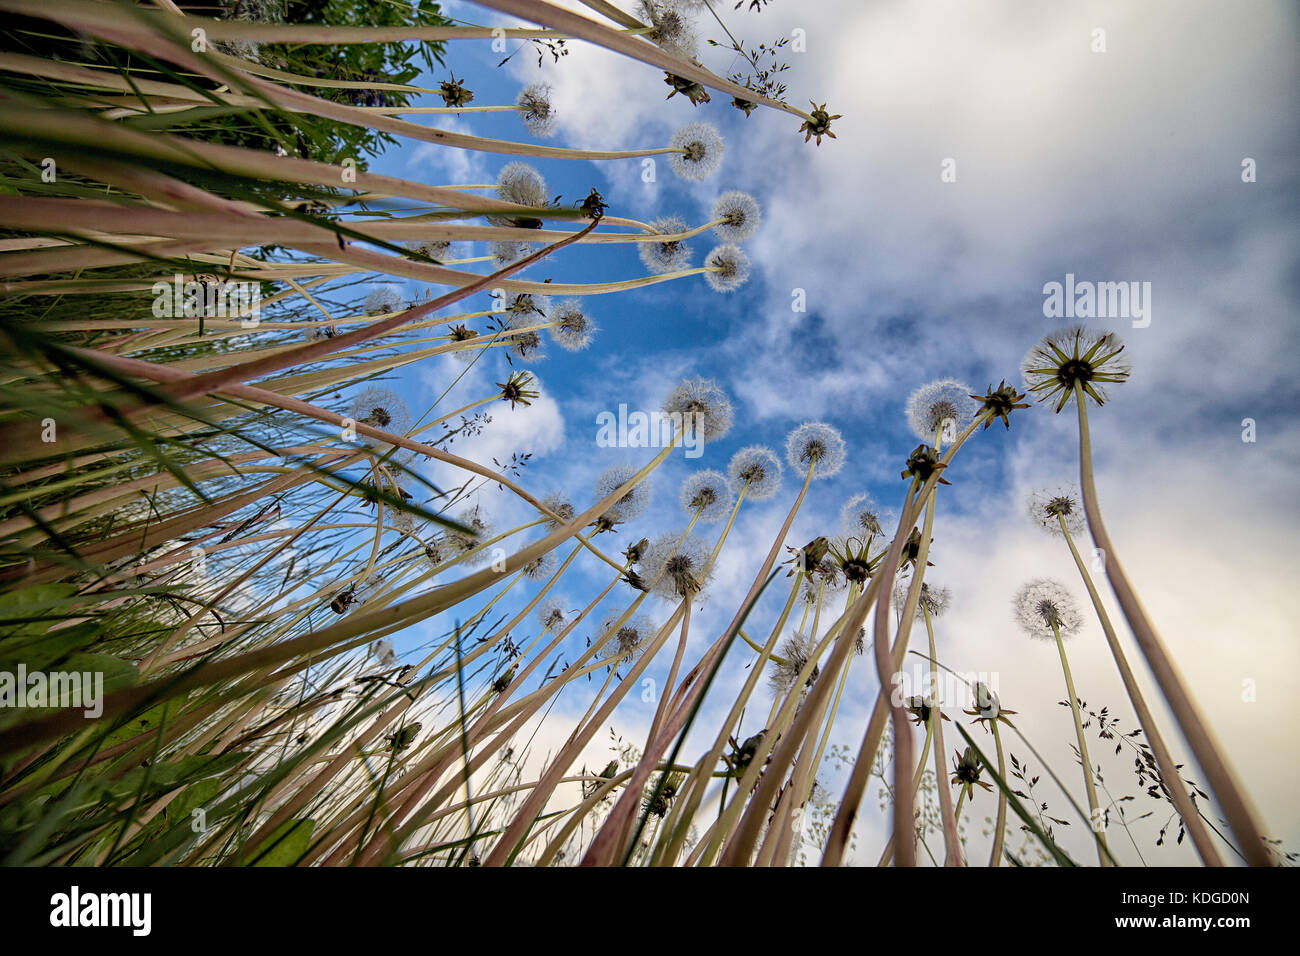 Dandelions shot from a very low perspective looking up against a blue sky Stock Photo